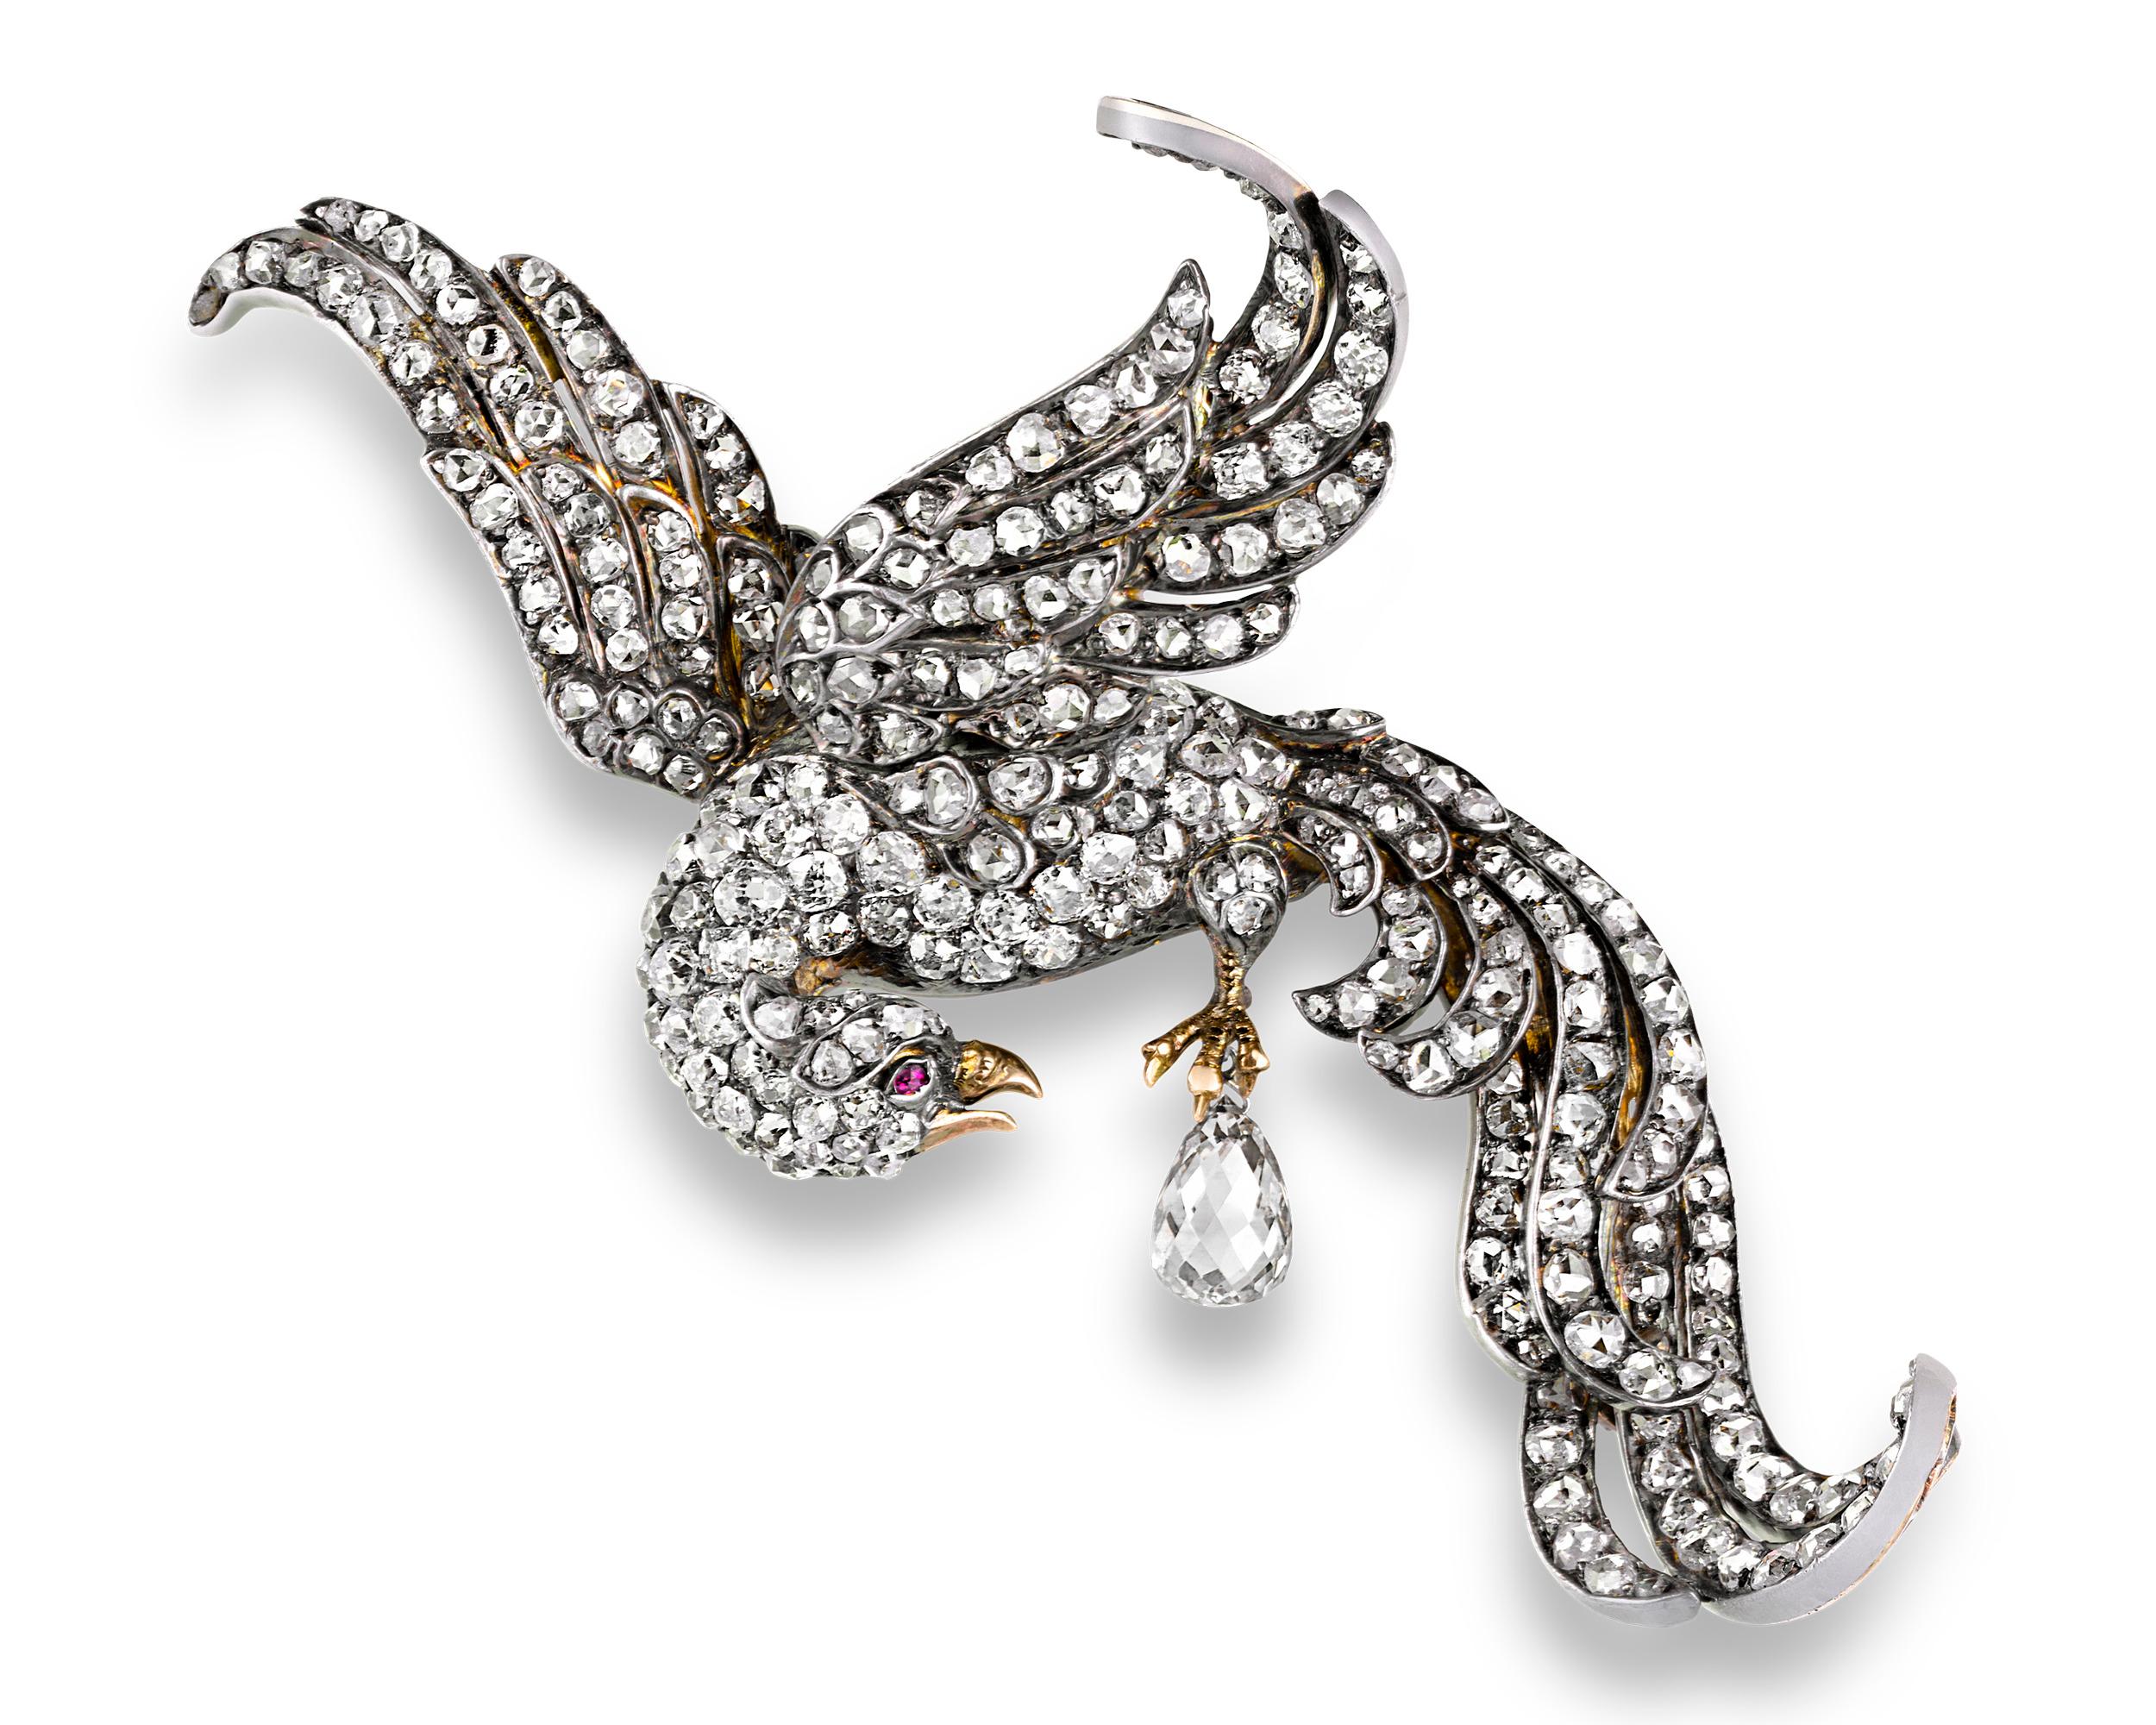 An array of Old Mine-cut diamonds are featured in this antique brooch that takes the form of a graceful white peacock, given life with a ruby eye. Set in gold over silver, the piece almost certainly dates to the Victorian era, an age named for Queen